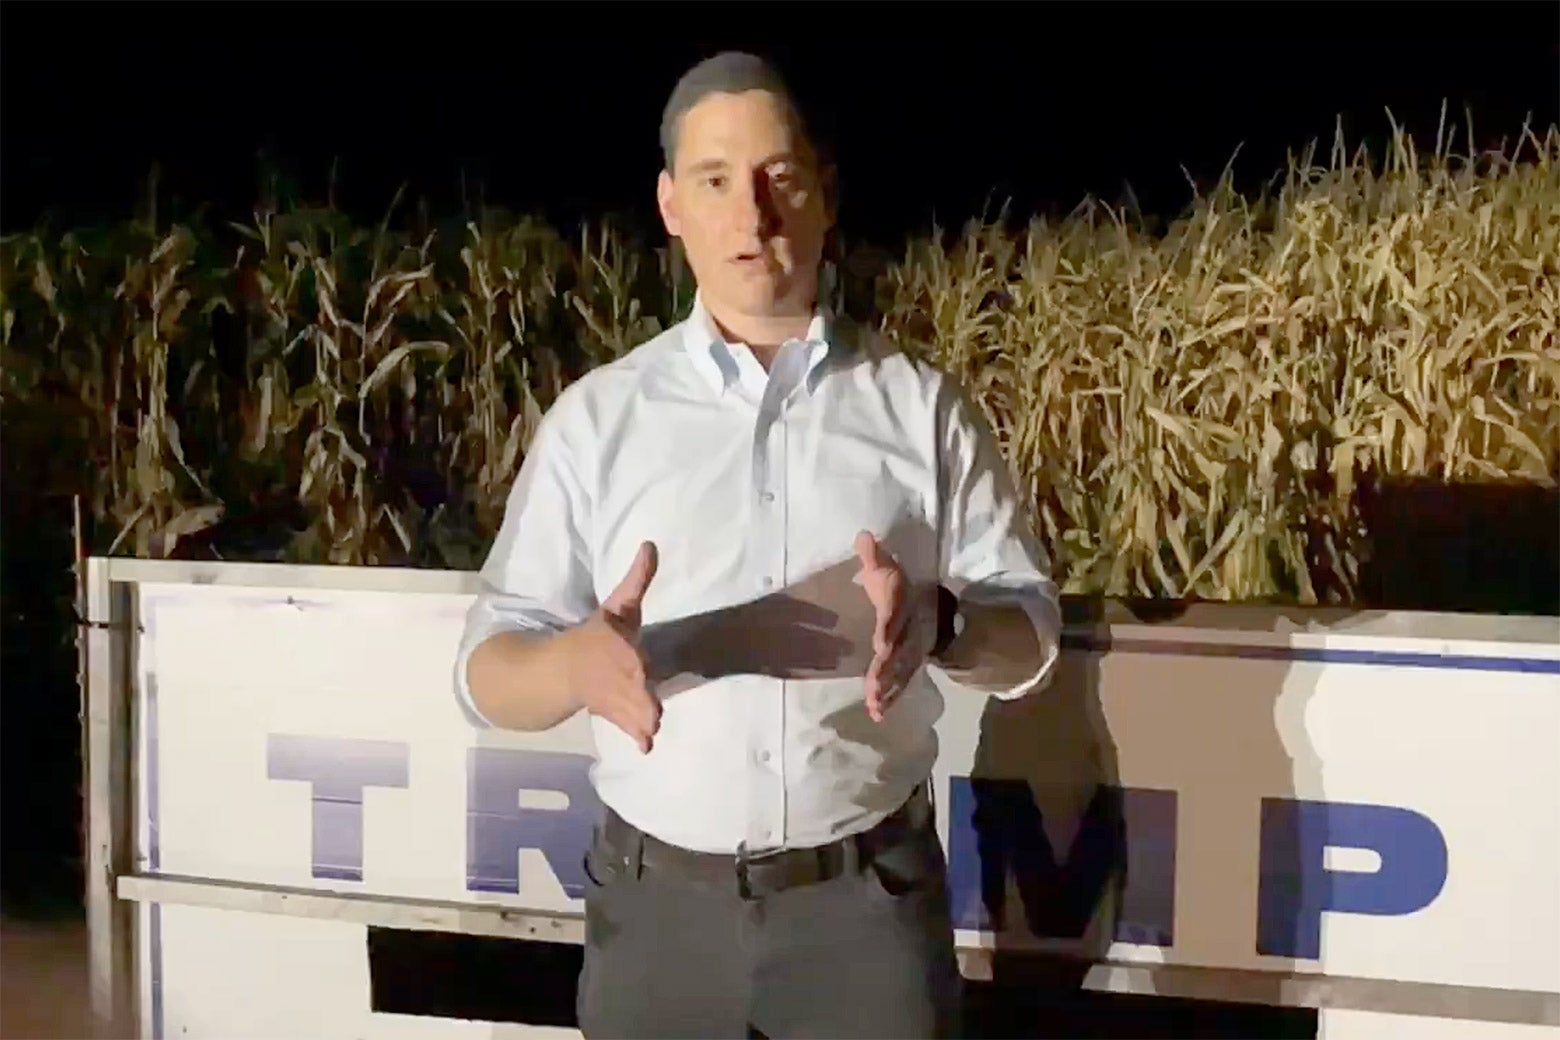 Still of Mandel in a white button-down shirt gesturing as he stands in front of a large TRUMP sign in a cornfield at night